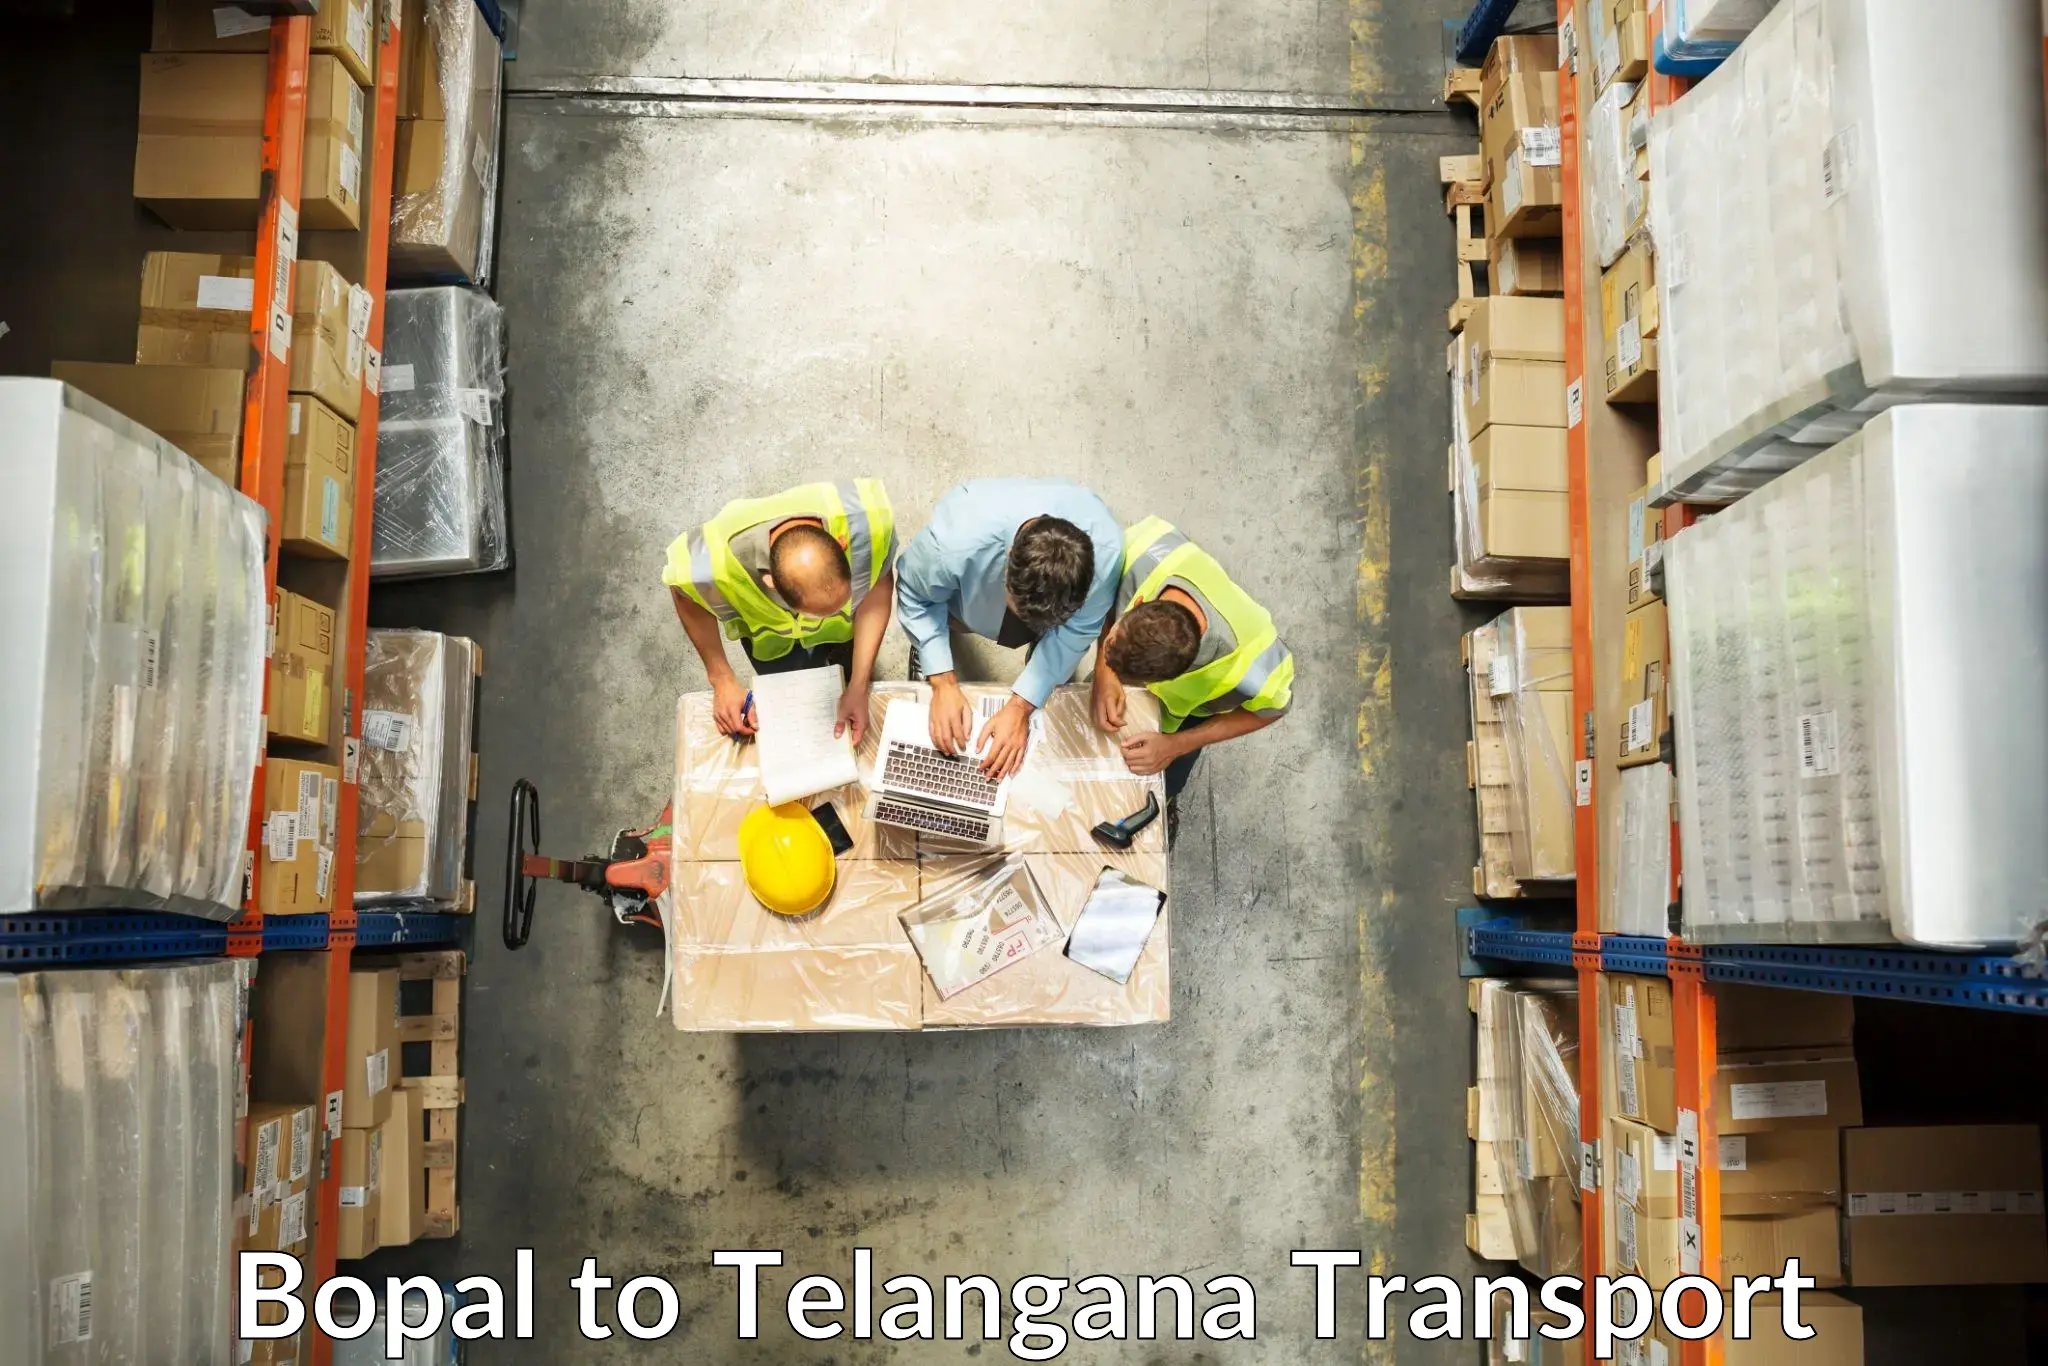 Vehicle transport services in Bopal to Nalgonda